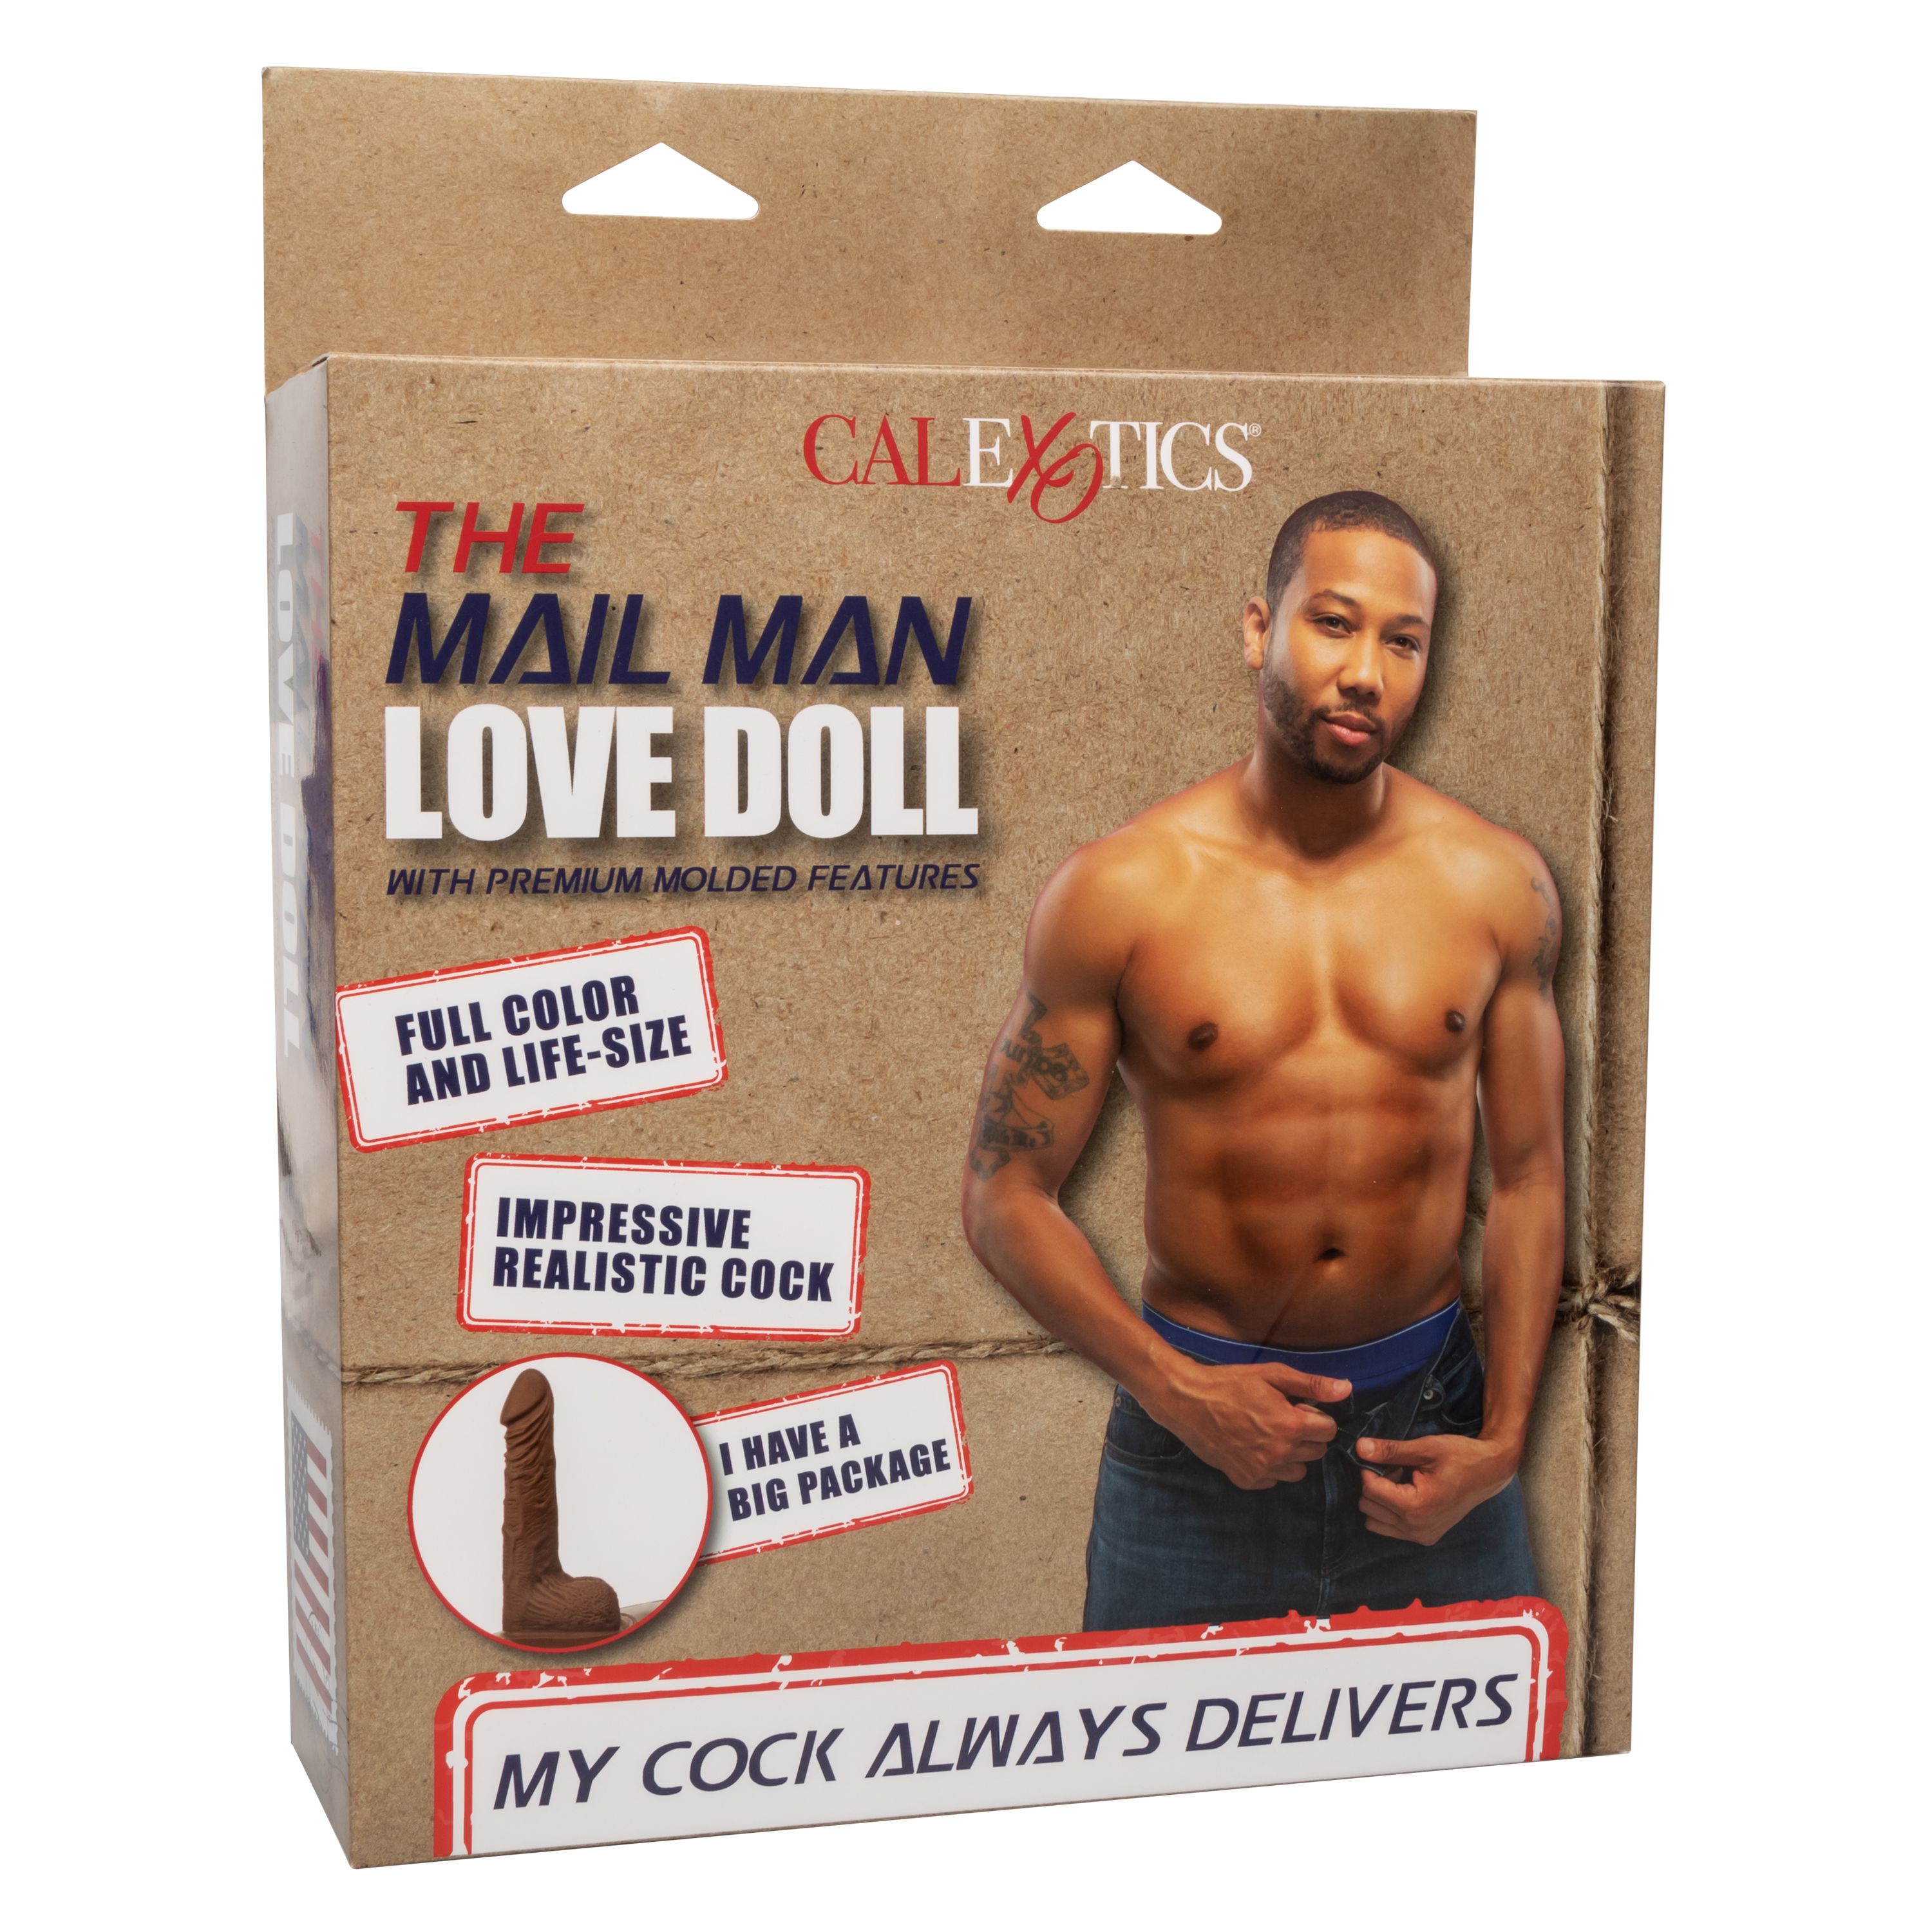 THE MAIL MAN LOVE DOLL 